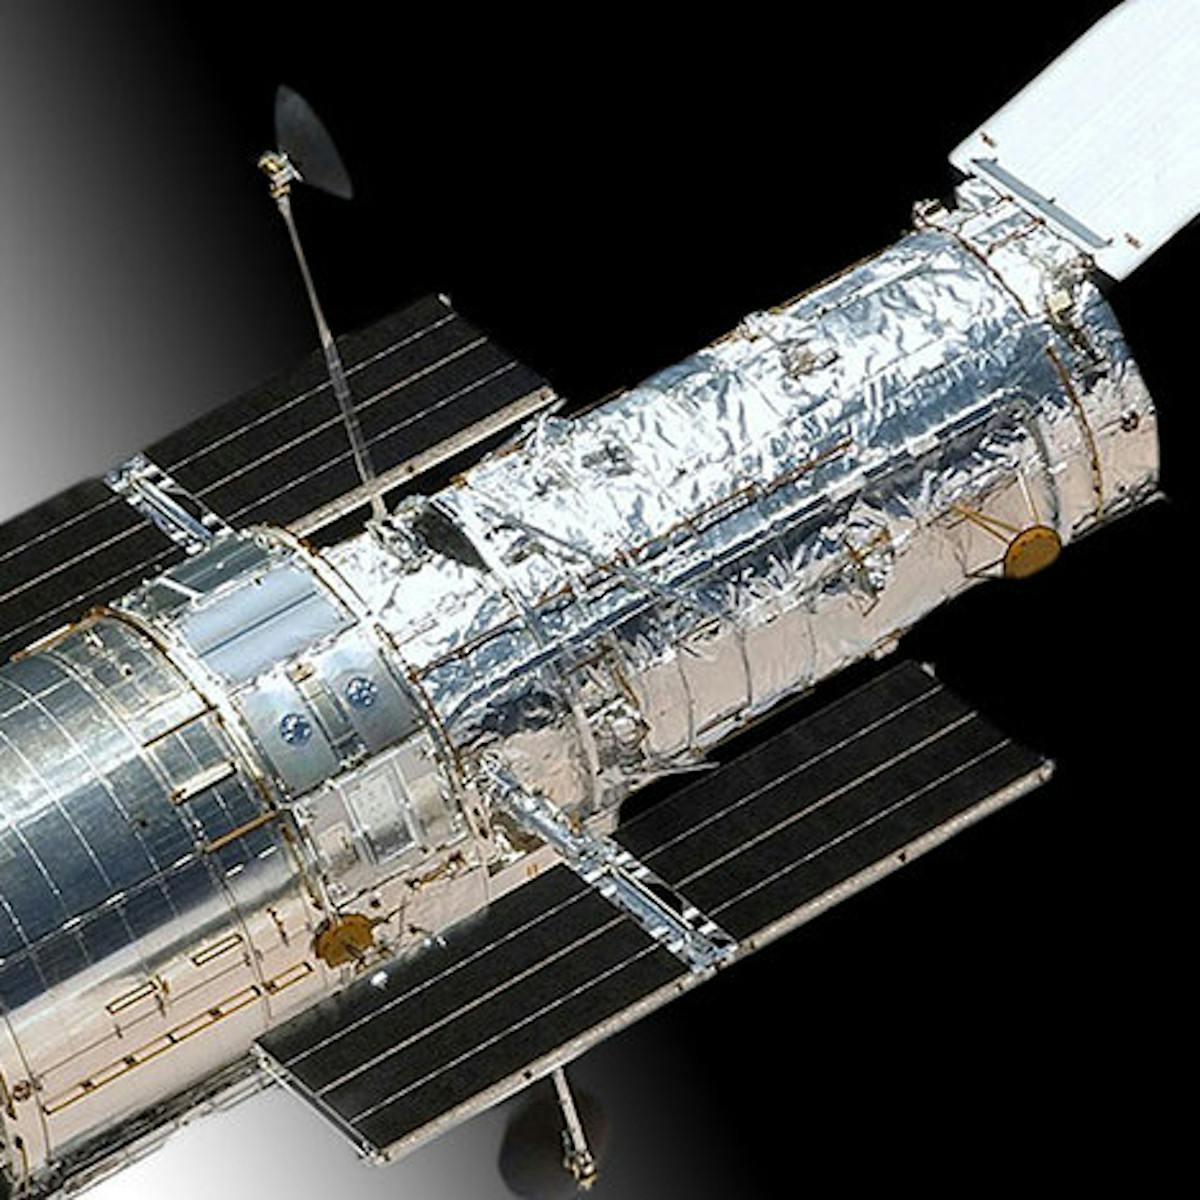 Hubble and Beyond (rebroadcast)